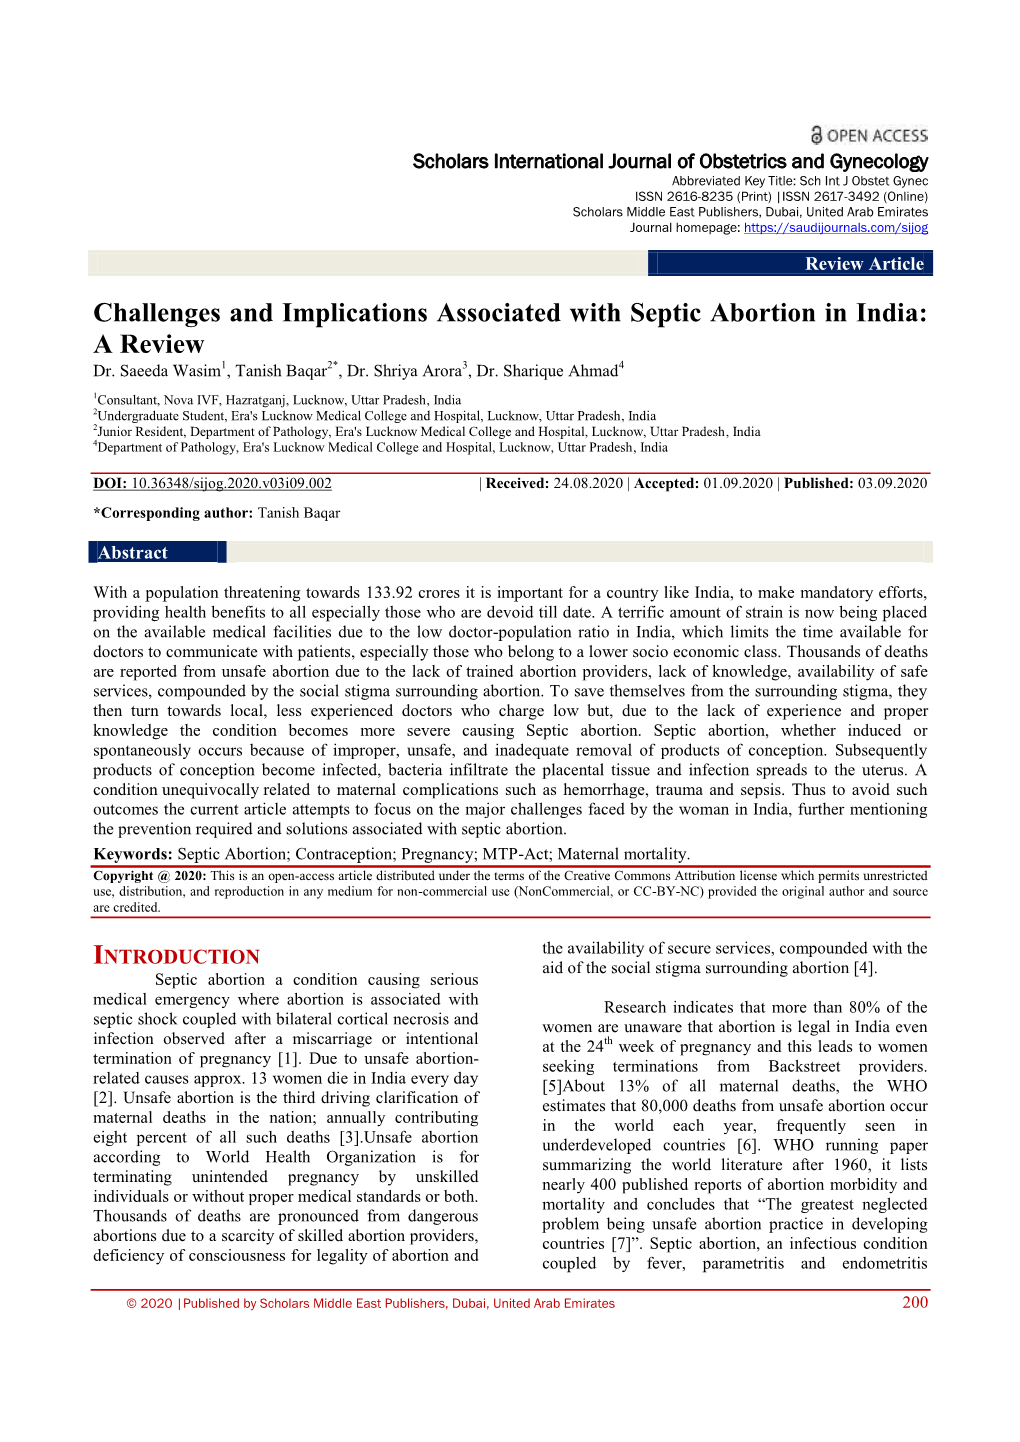 Challenges and Implications Associated with Septic Abortion in India: a Review Dr